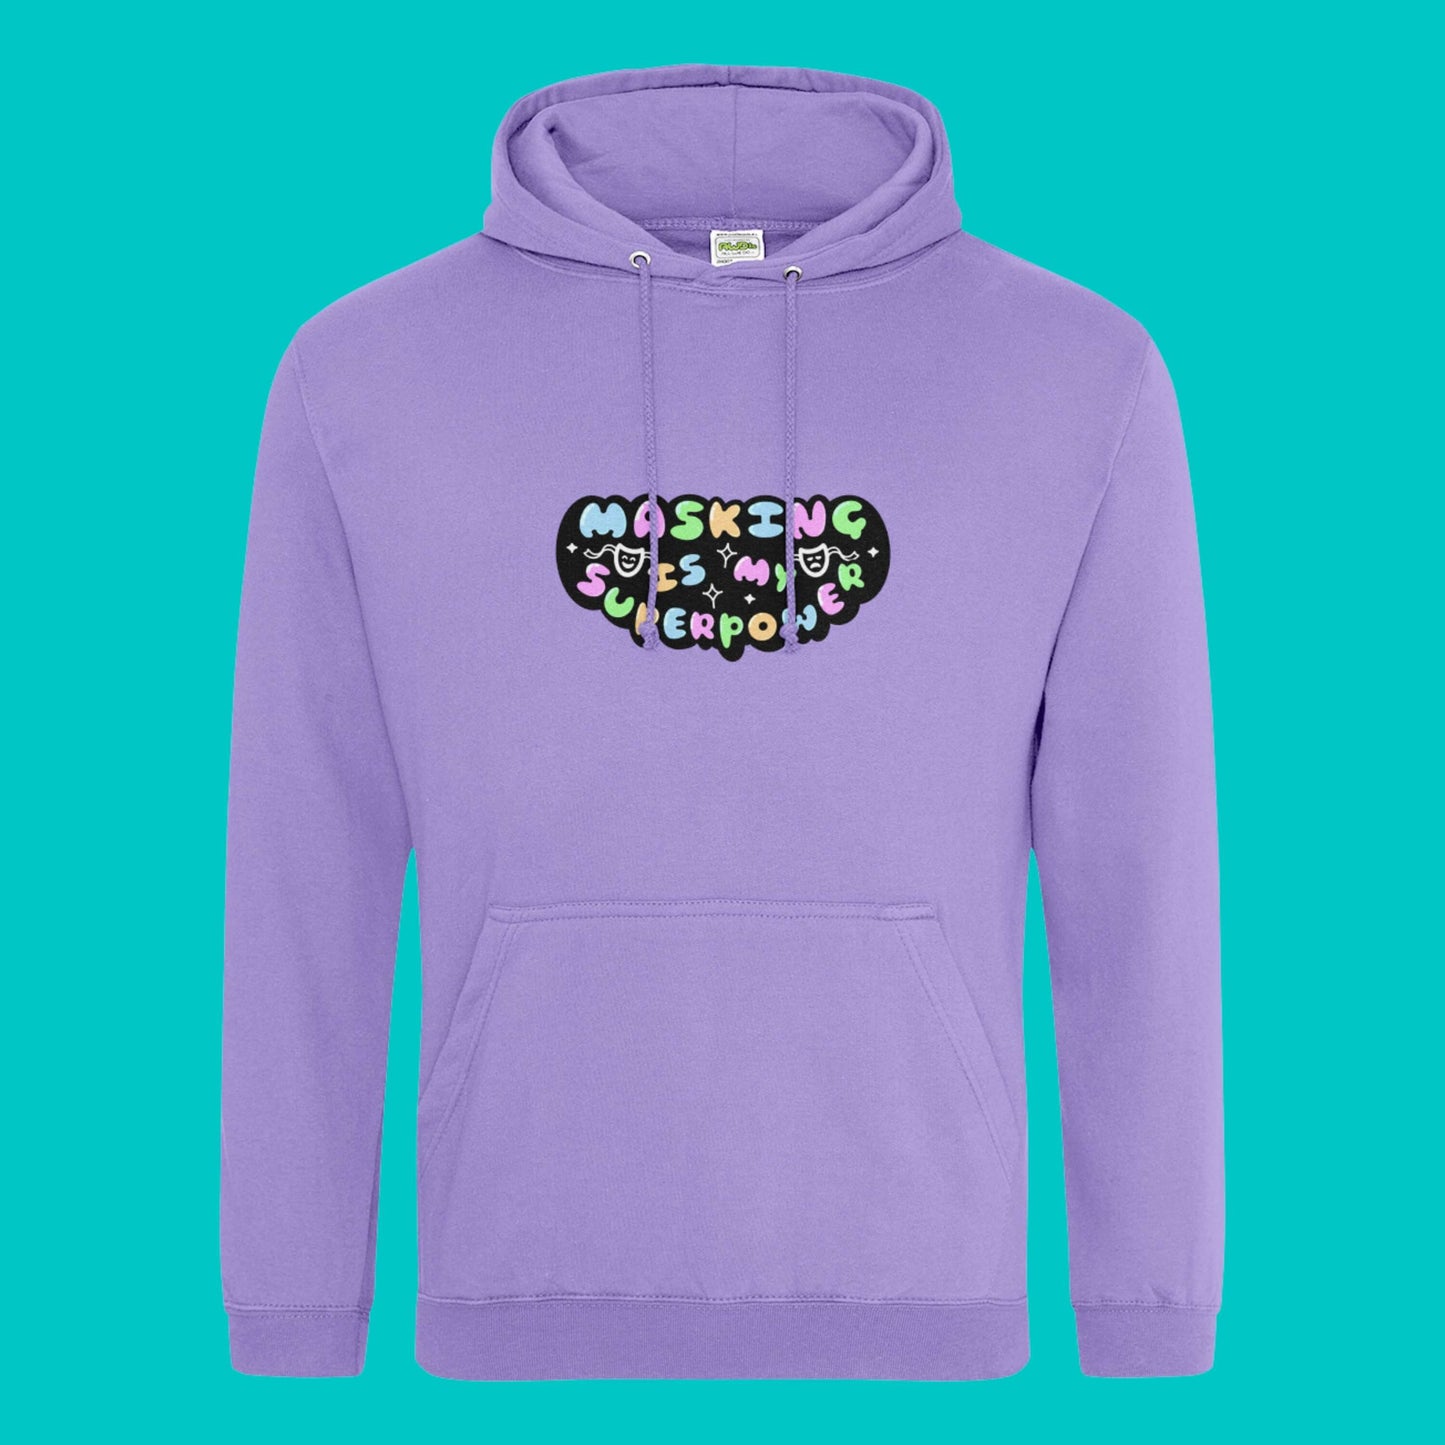 The digital lavender Masking Is My Super Power Hoodie on a blue background. The pastel purple lilac hoodie features pastel rainbow bubble writing that reads 'masking is my superpower' with white sparkles, a happy and sad drama masks all on a black oval. Raising awareness for neurodivergent people with ADHD or Autism.